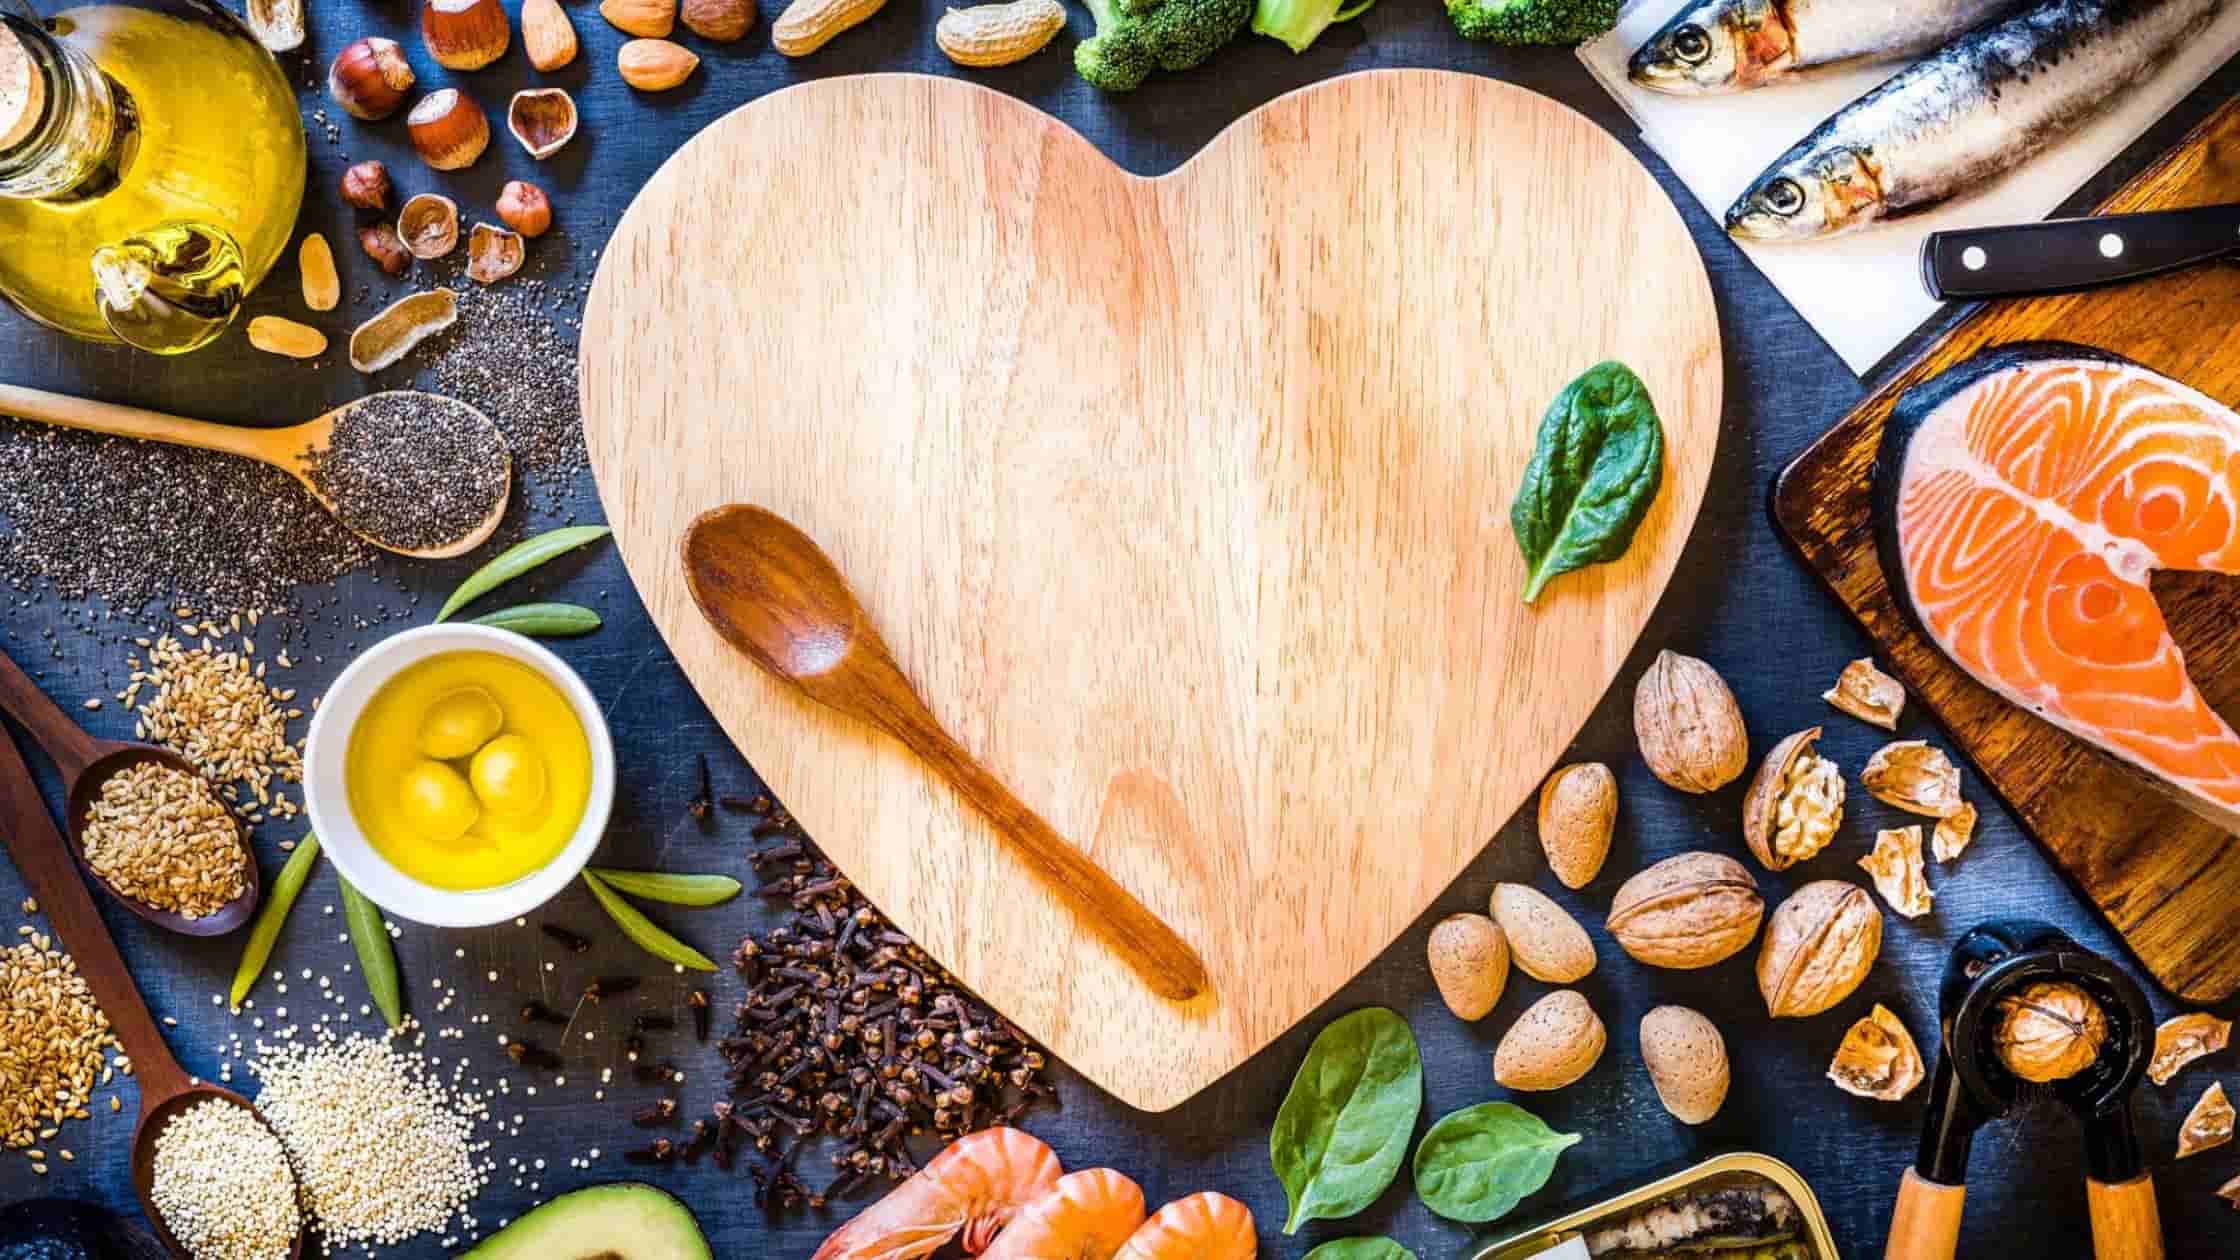 Is Cholesterol An Essential Nutrient? - All You Need To Know!